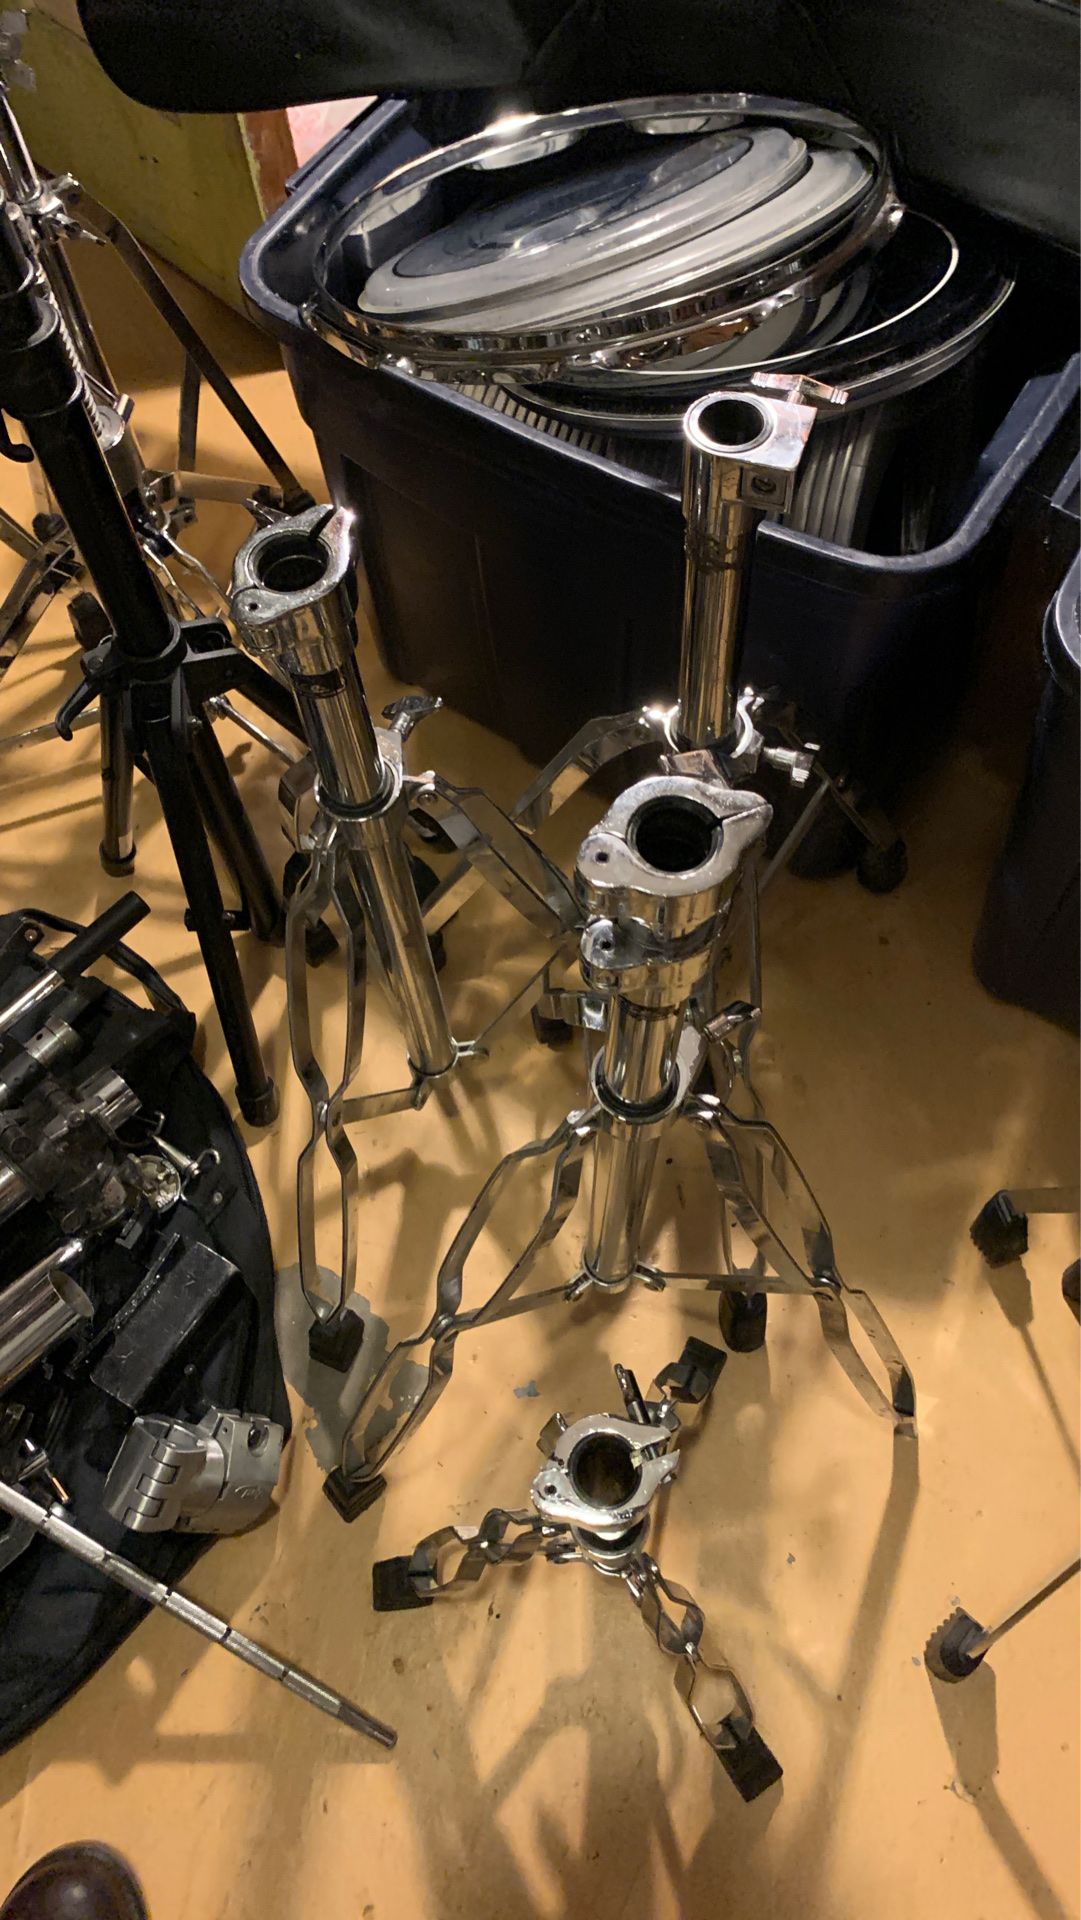 Cymbal booms, mic stands, snare drum stand, bass pedal, bass drum legs, hardware...